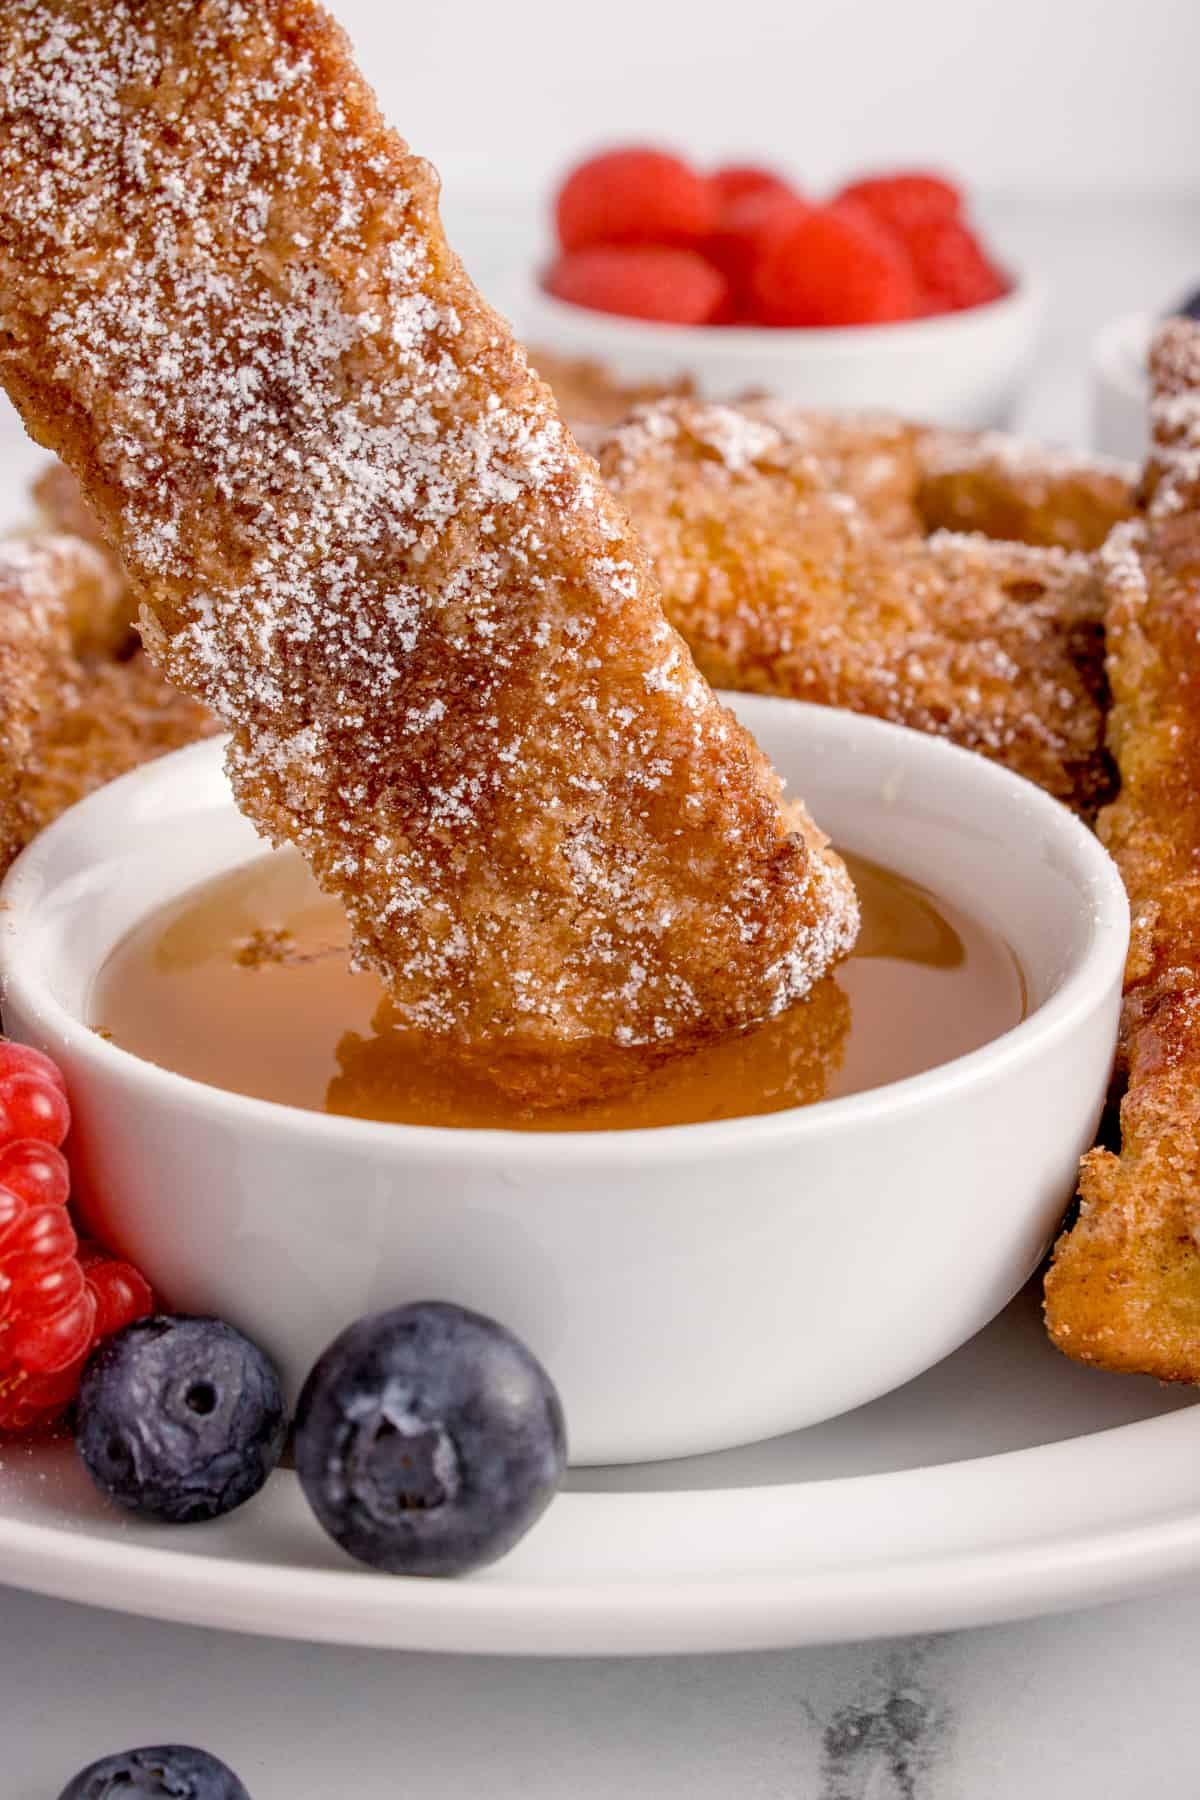 A french toast stick being dipped into a cup of syrup.